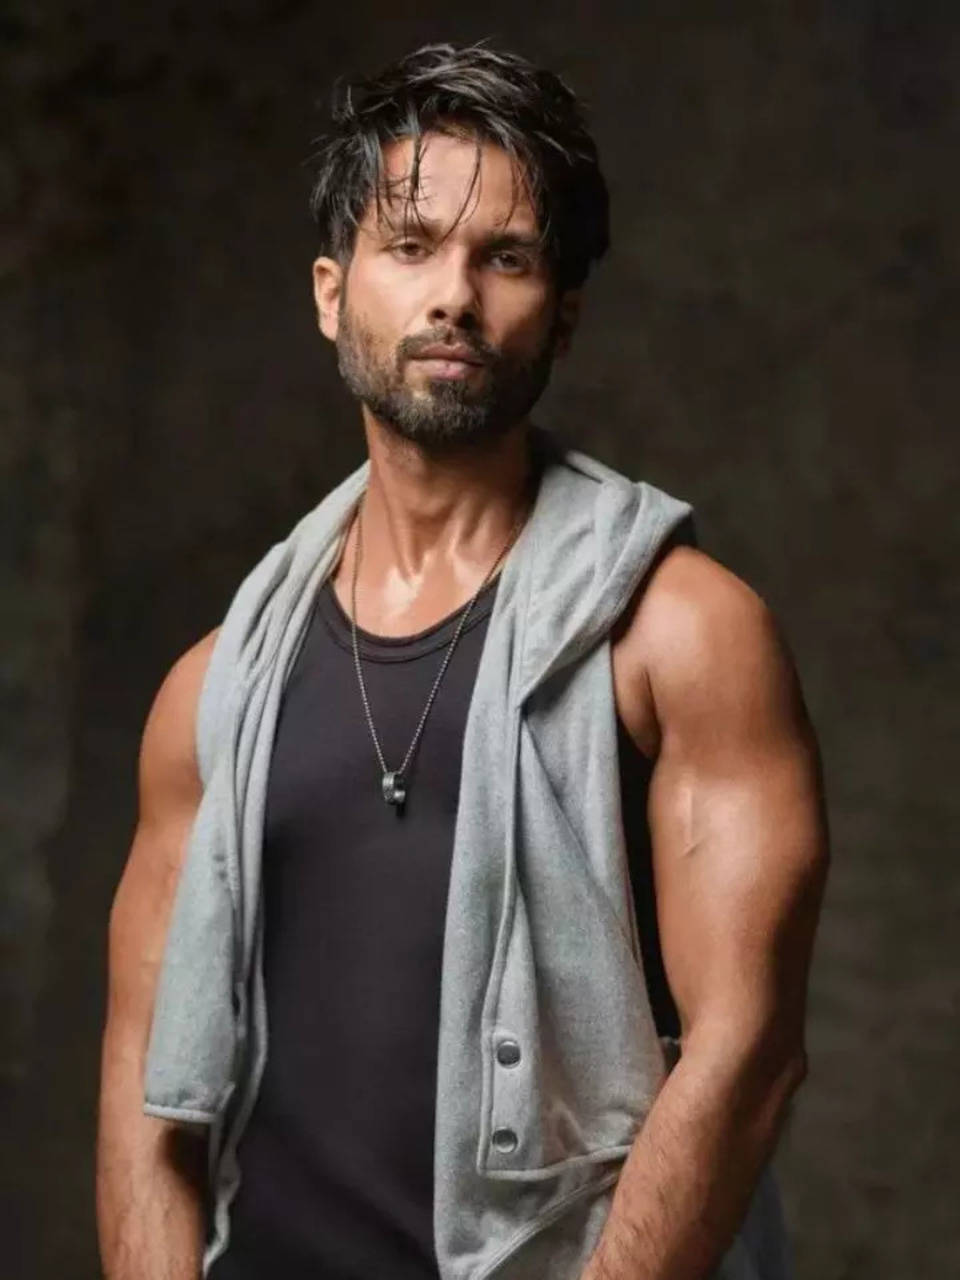 Farzi actor Shahid Kapoor's secret to ripped physique | Times of India